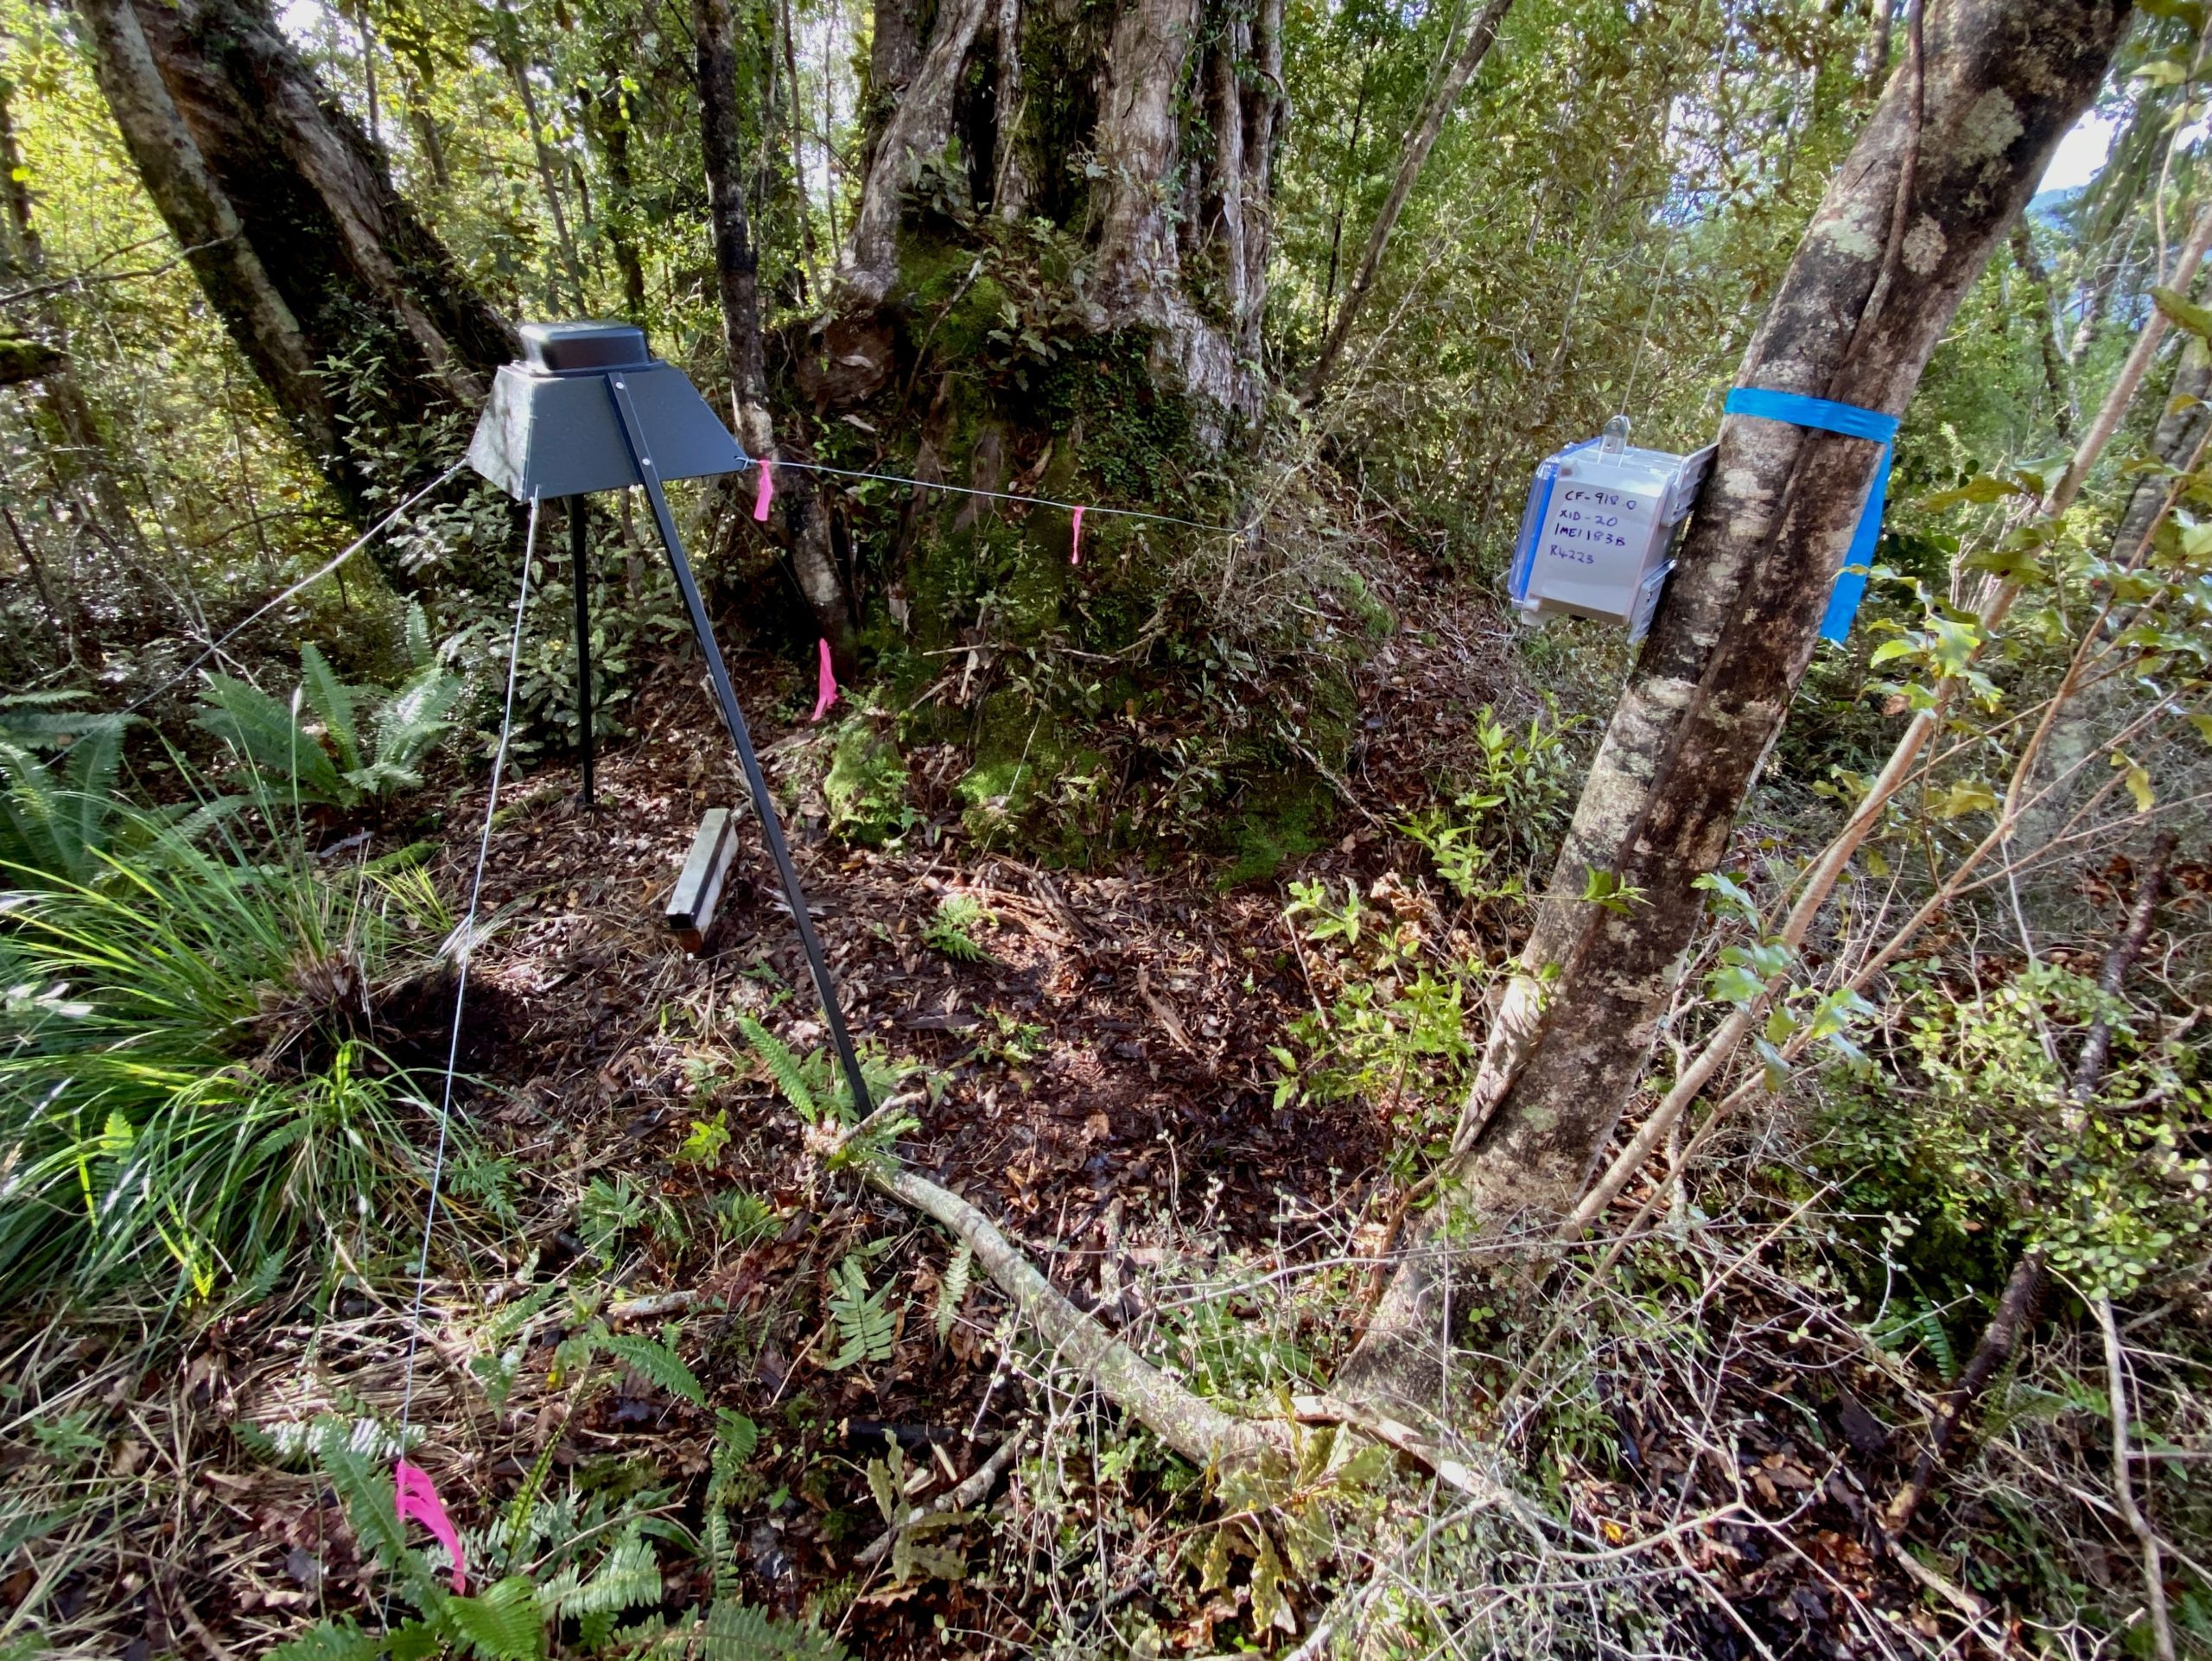 An A.I. predator detection camera set up in beech forest. On the right is a sat box, and on the ground is an automated lure dispenser. Image credit: Chad Cottle